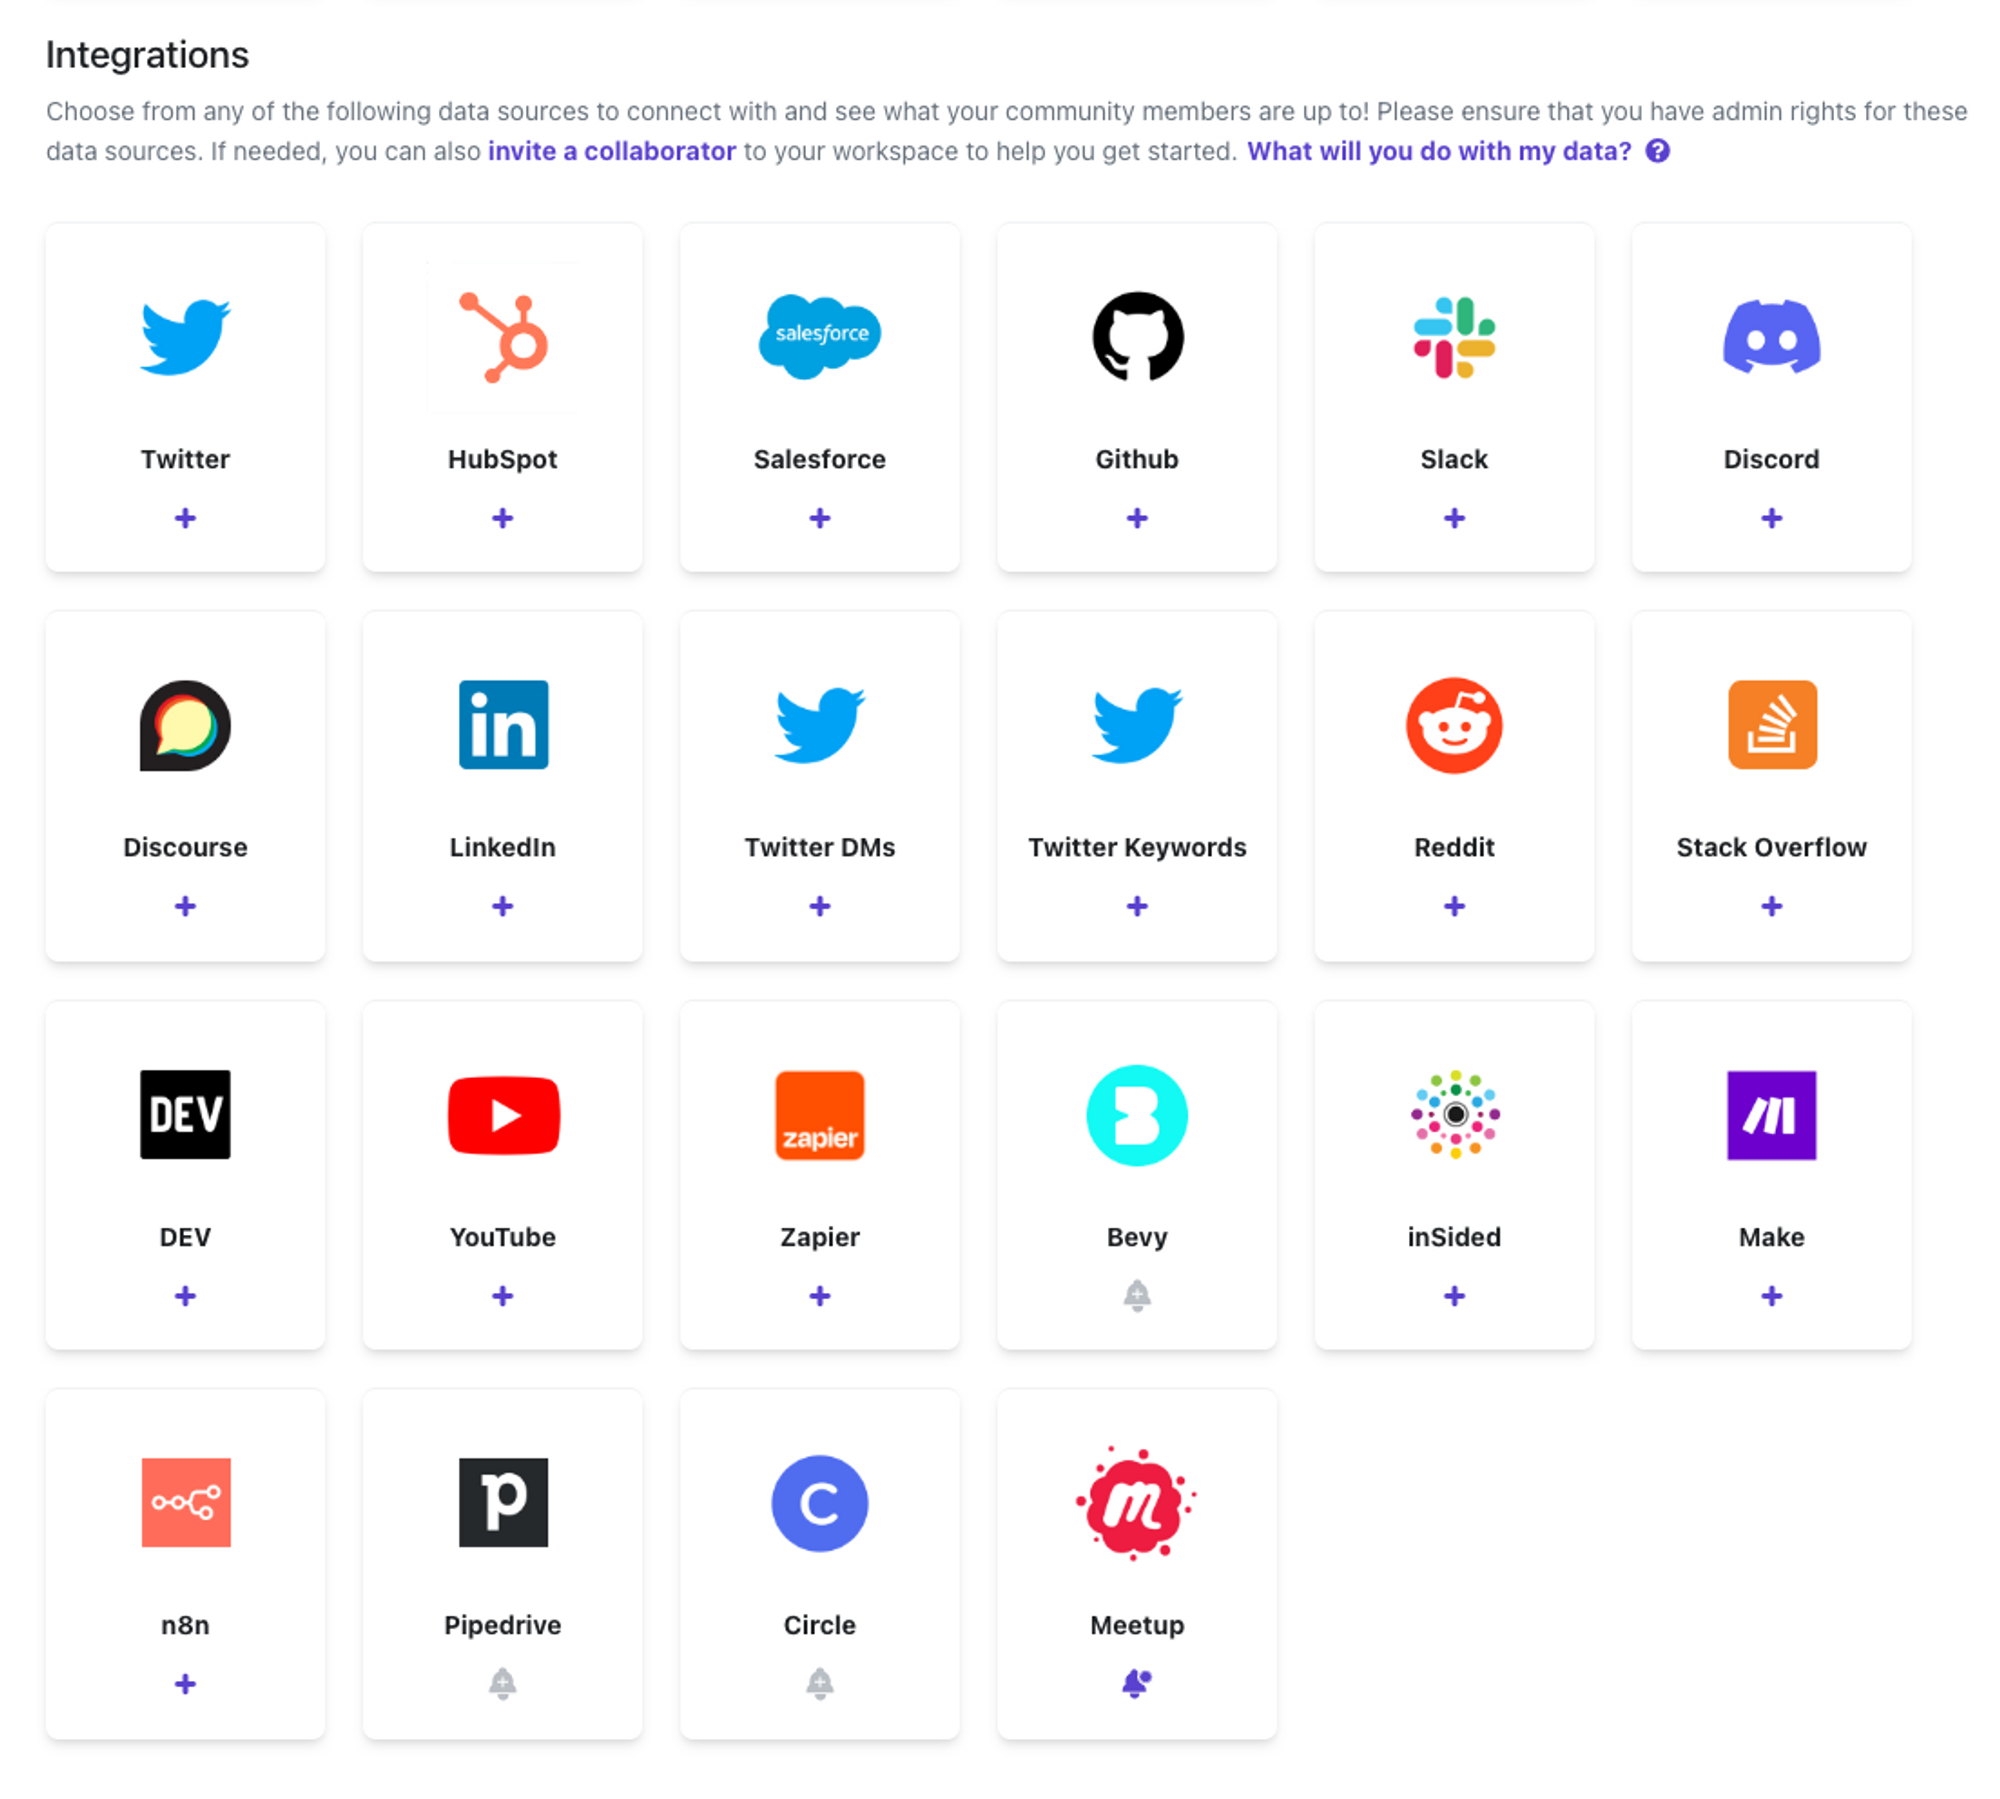 Our first party integrations include Twitter, Hubspot, Salesforce, Github, Slack, Discord, Discourse, LinkedIn, Reddit, Stack Overflow, DEV, Youtube, Zapier, Insided, Make, and n8n.